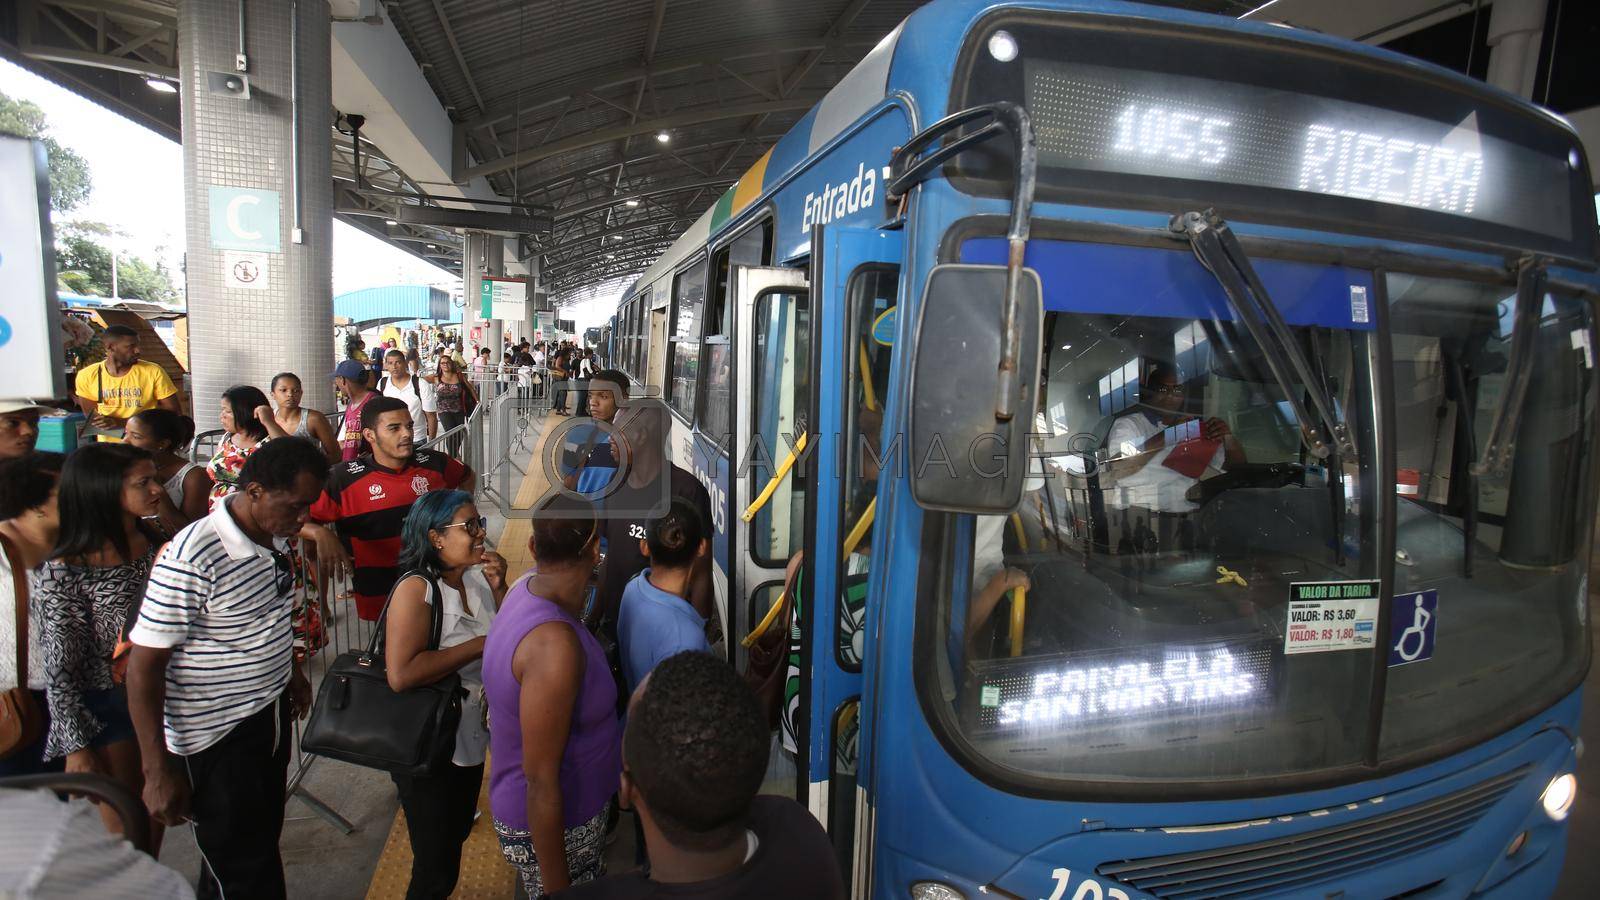 salvador, bahia / brazil - september 8, 2017: Passengers are seen while boarding buses at Mussurunga Station in Salvador.